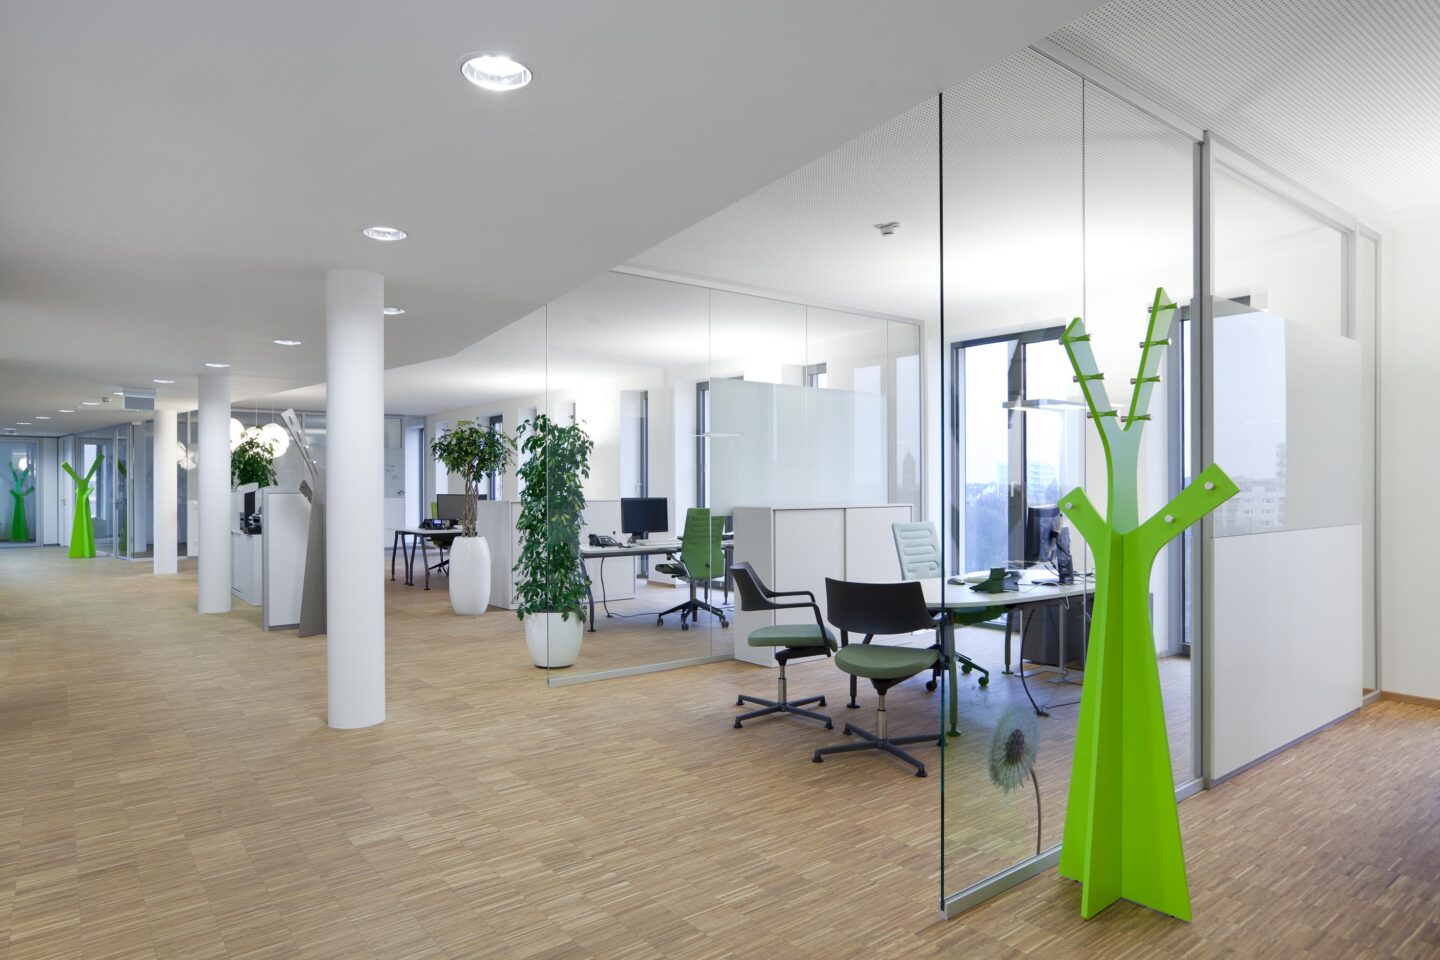 Disy information systems Karlsruhe │ fecopur skylight glazing │ Office furnishings with feco